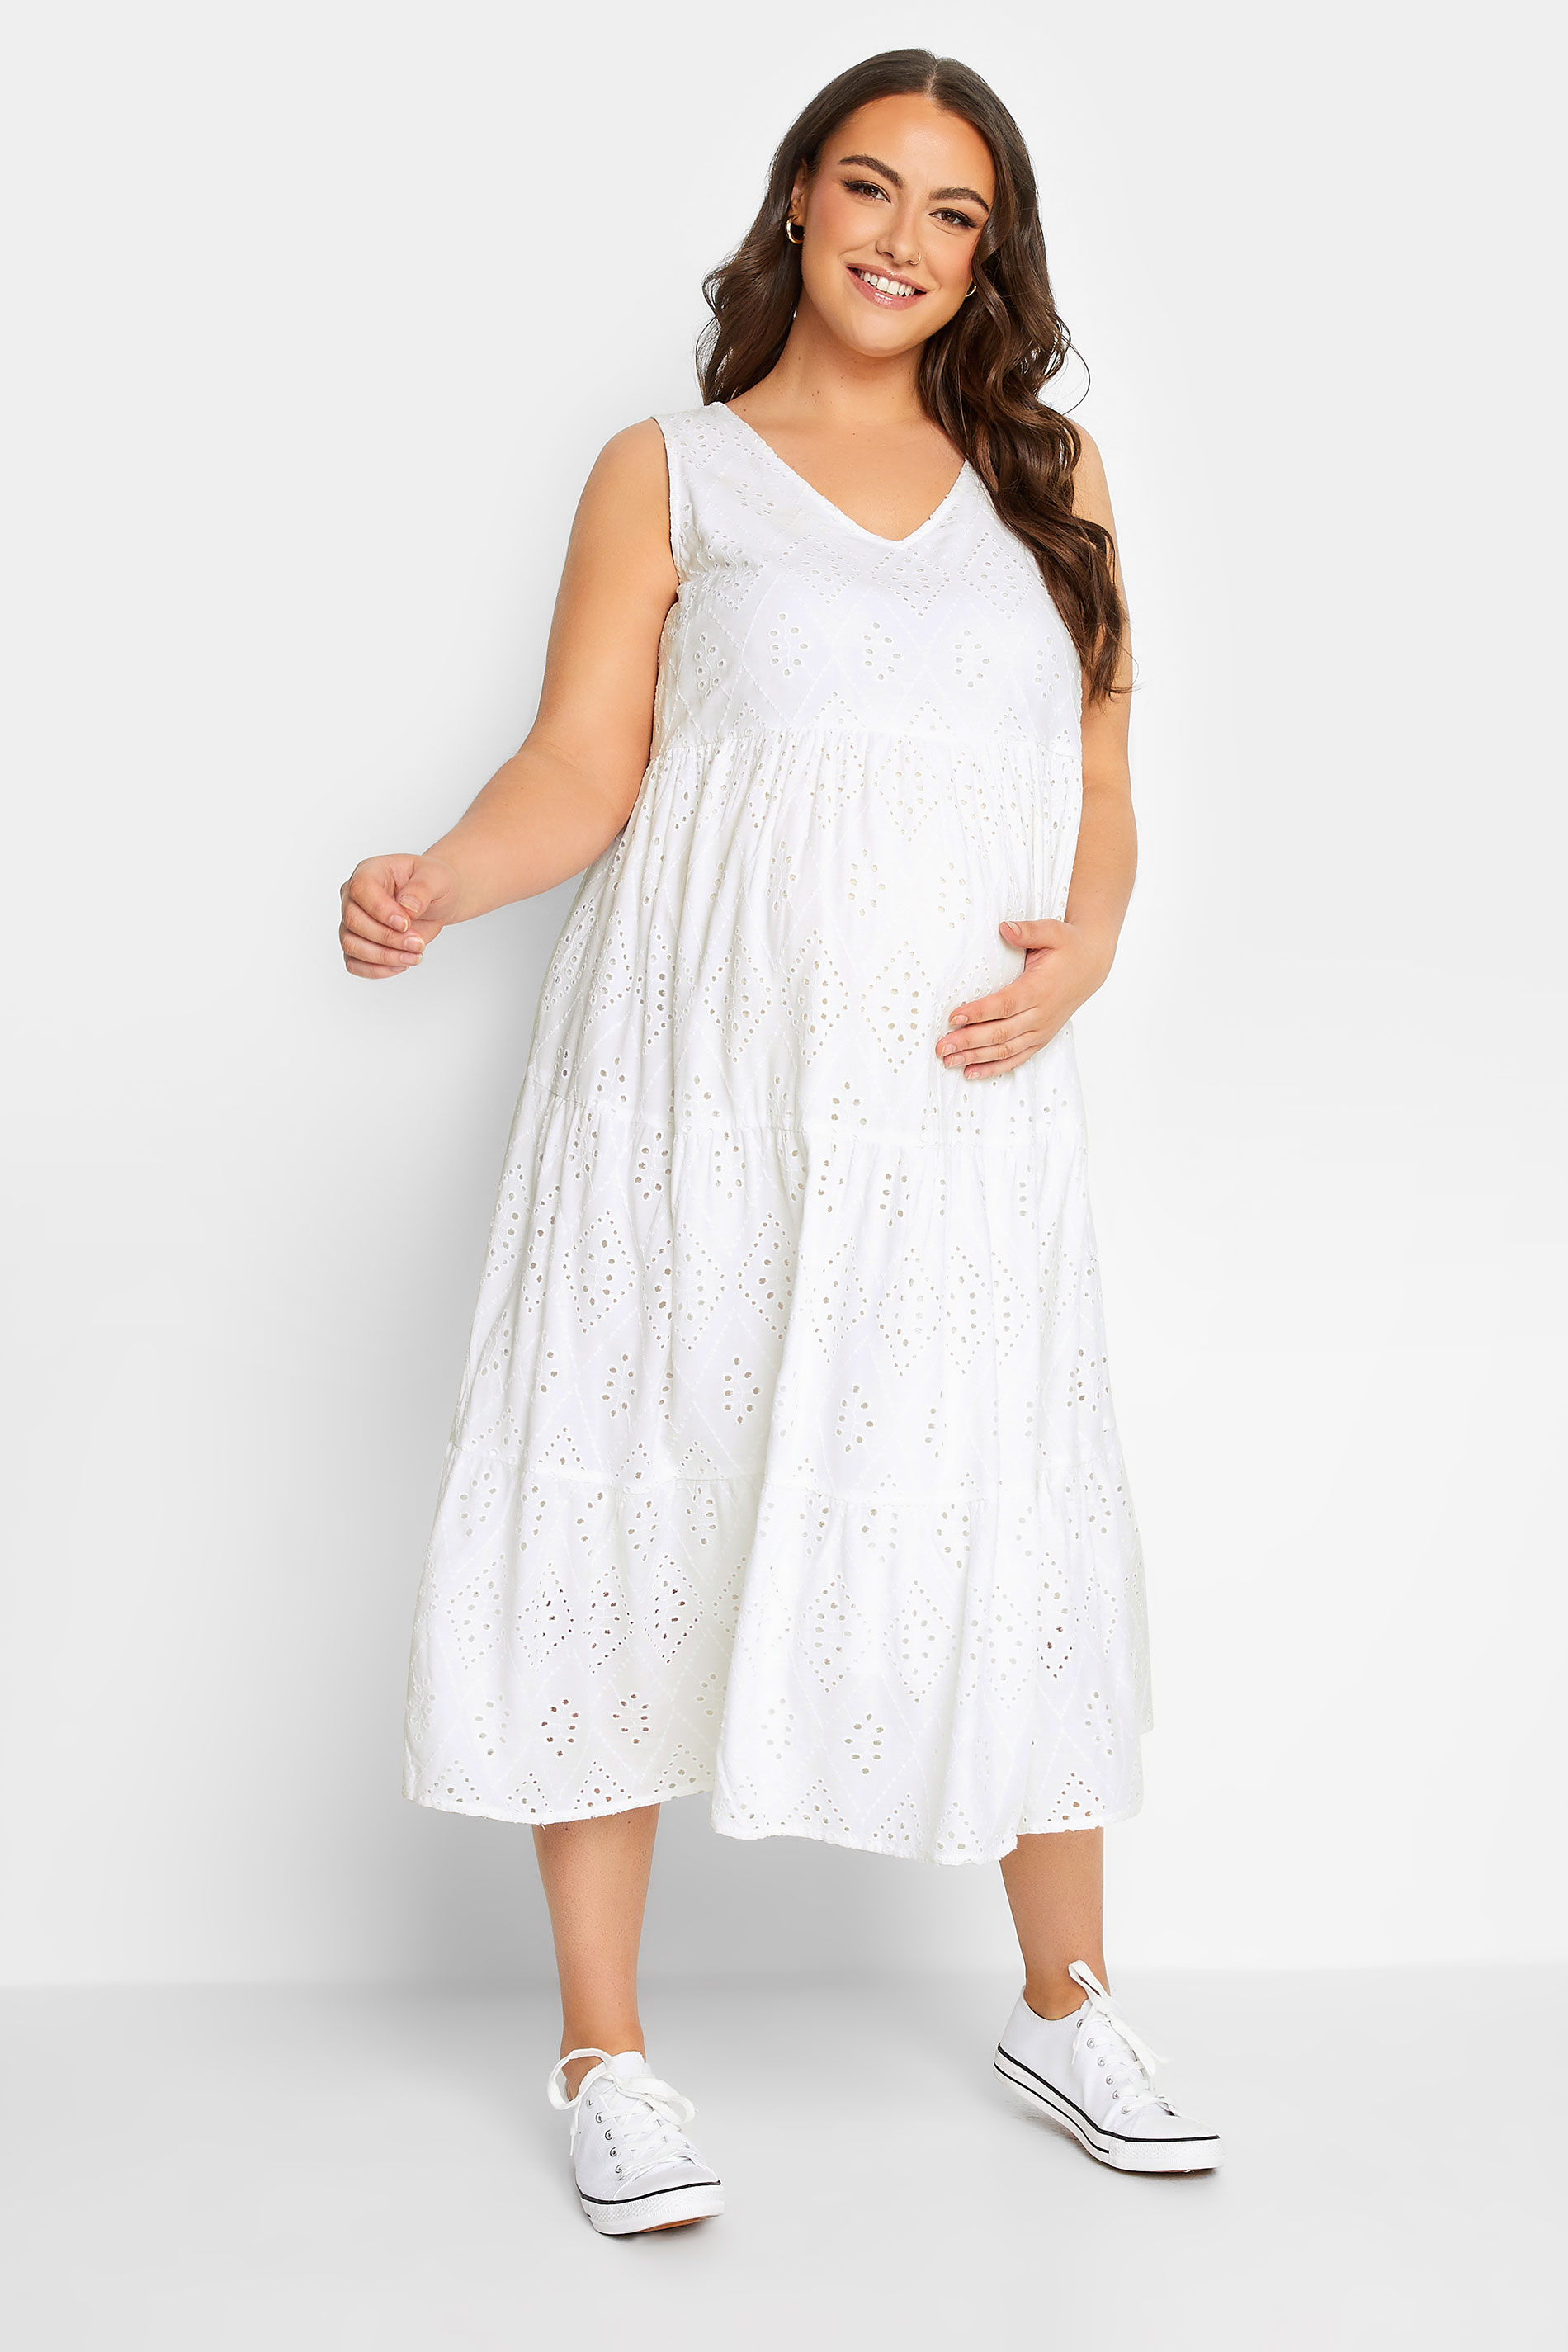 BUMP IT UP MATERNITY Plus Size White Tiered Midi Dress | Yours Clothing  3